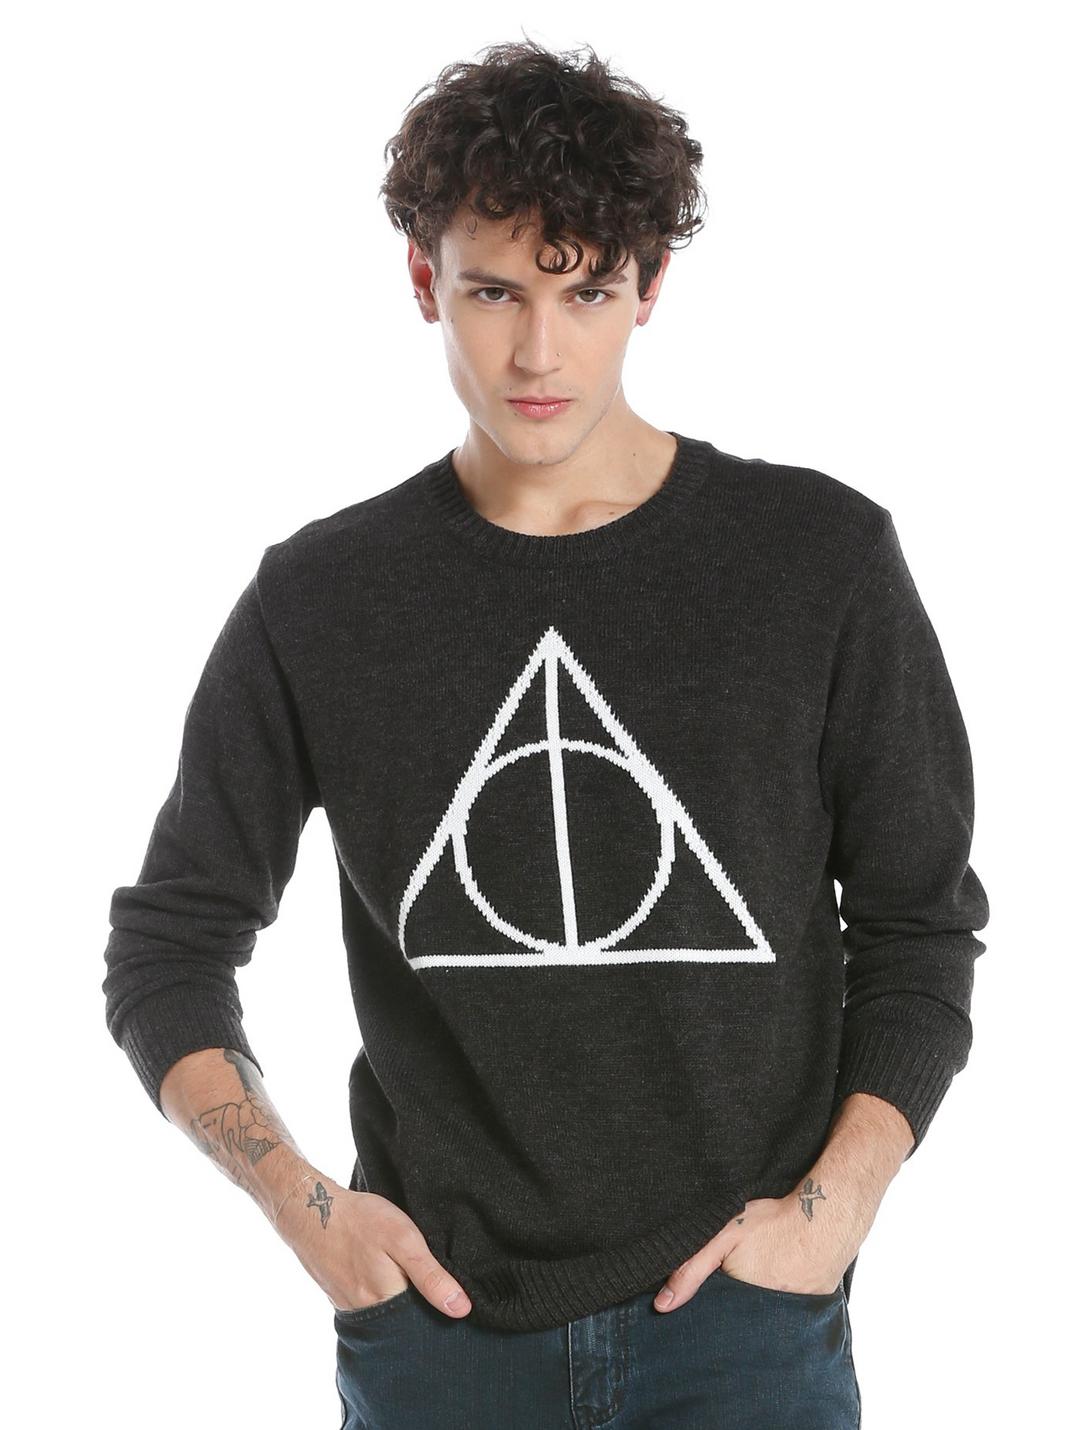 Harry Potter Deathly Hallows Sweater, BLACK, hi-res